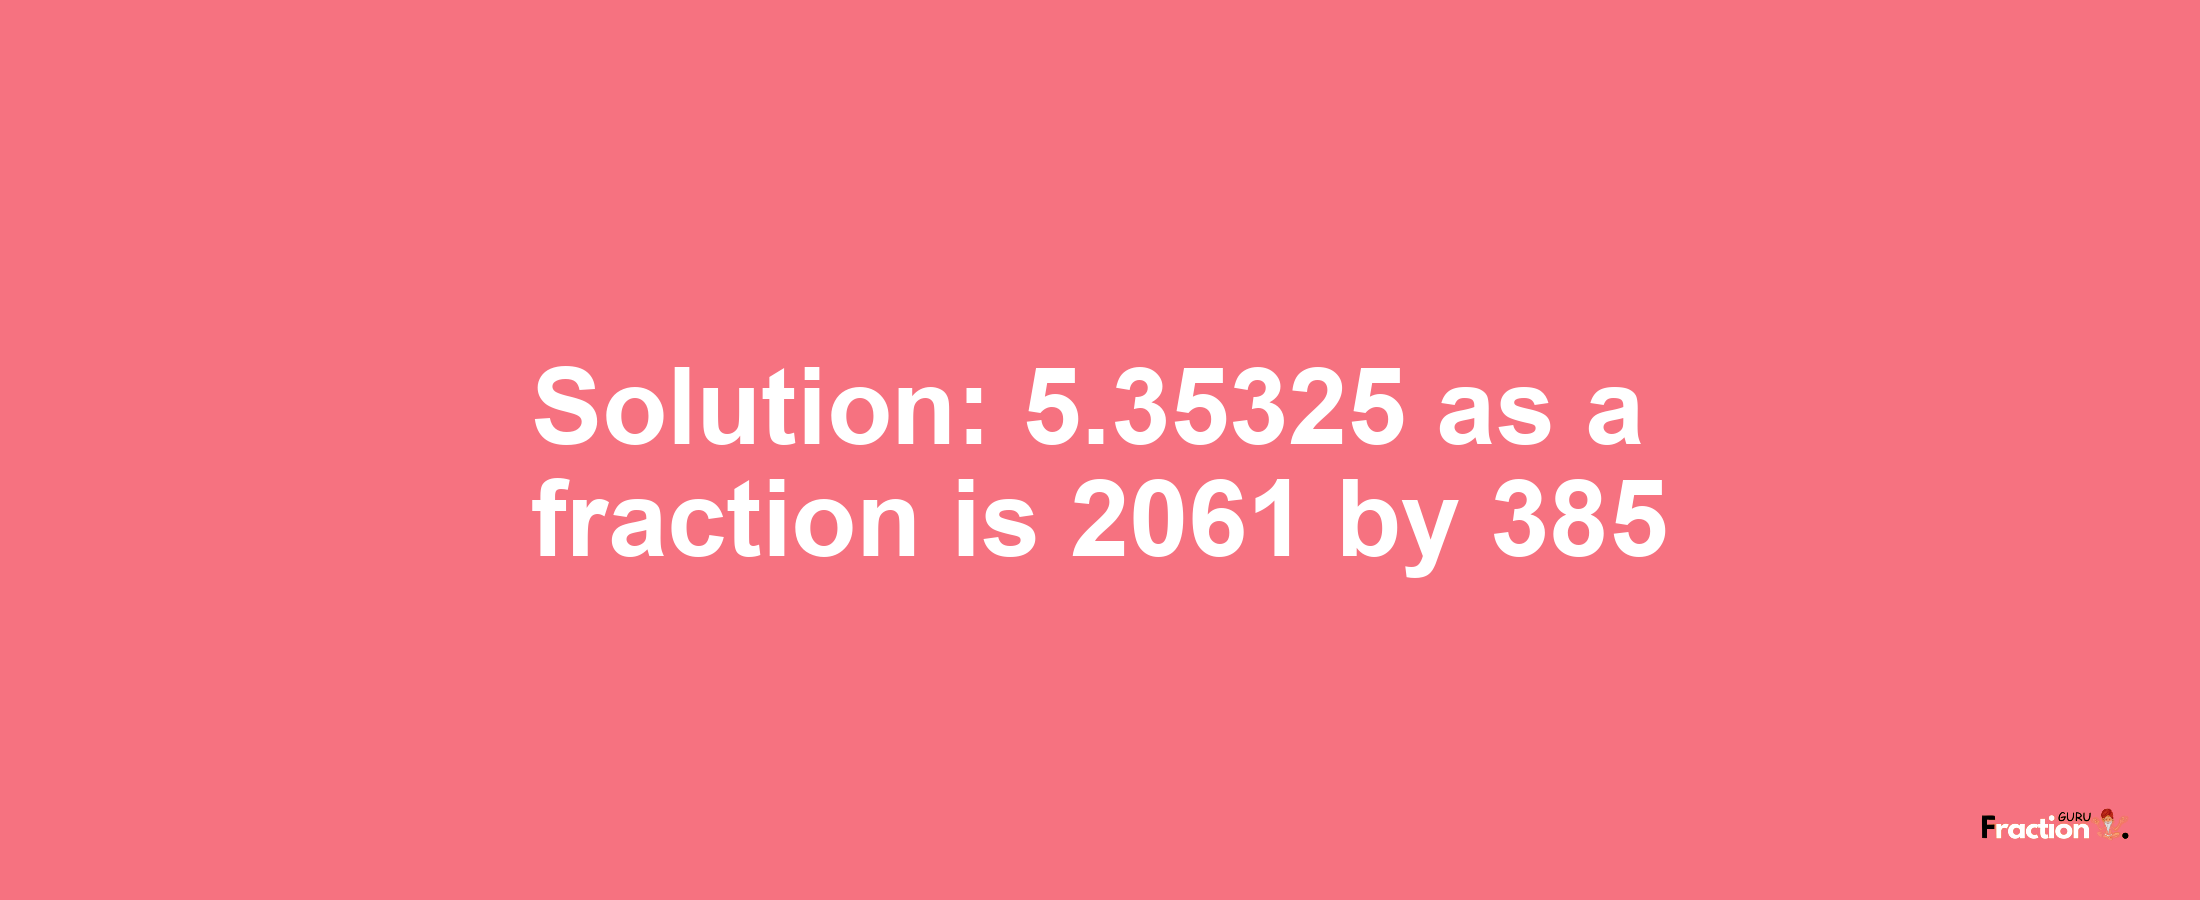 Solution:5.35325 as a fraction is 2061/385